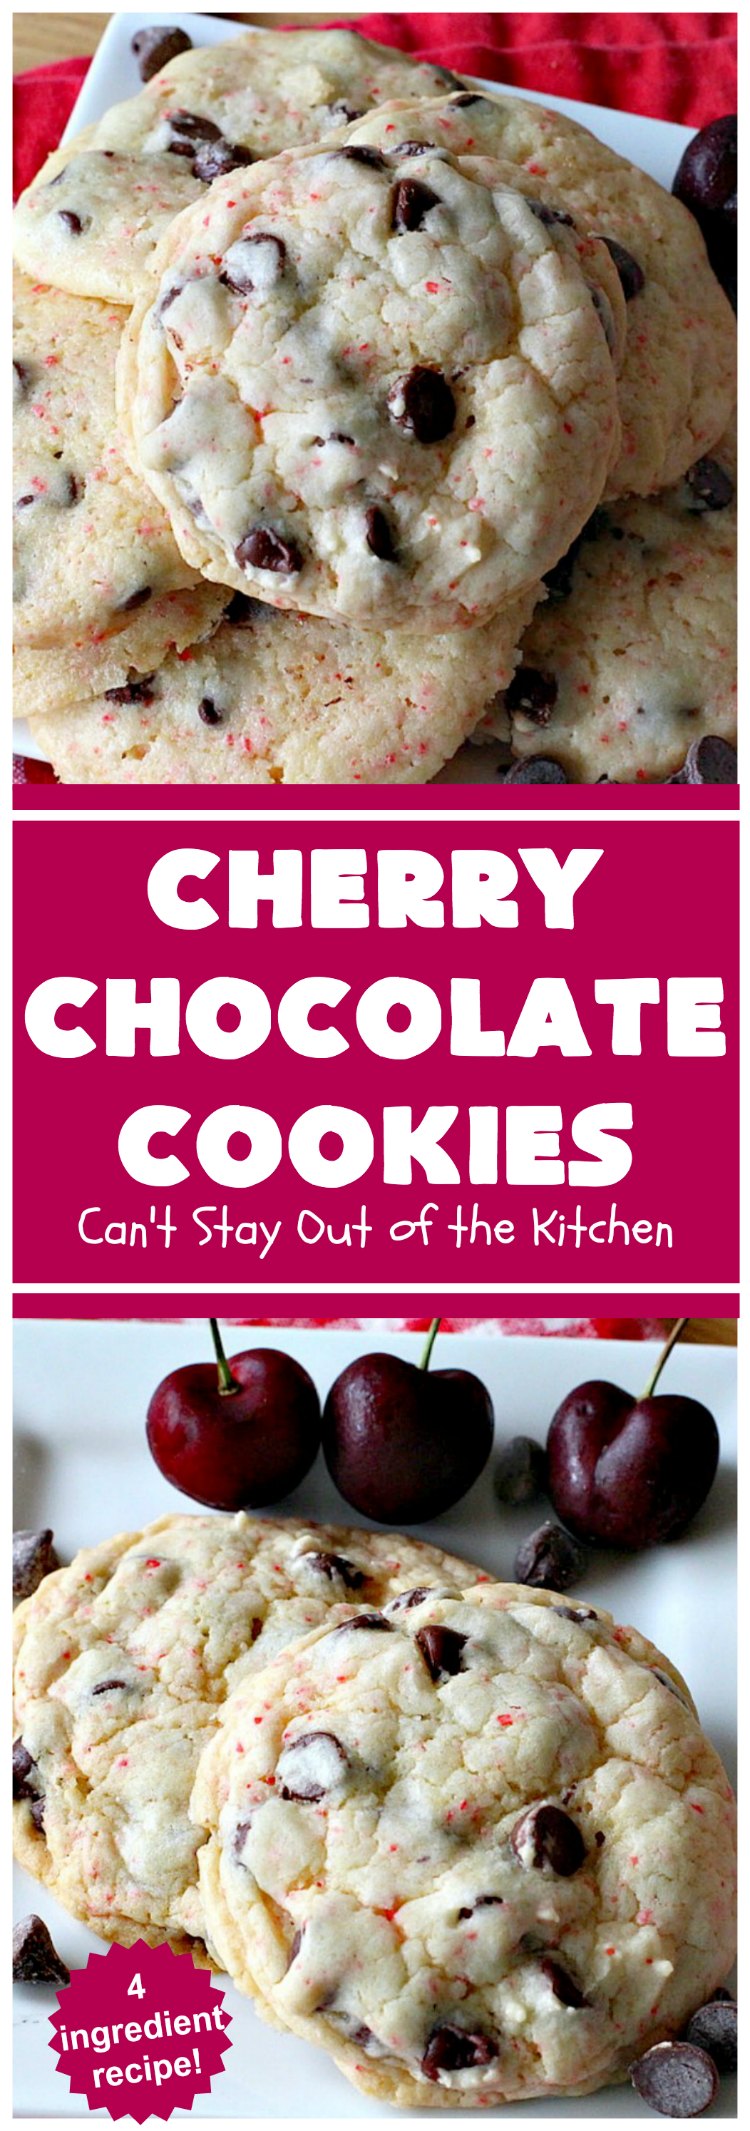 Cherry Chocolate Cookies | Can't Stay Out of the Kitchen